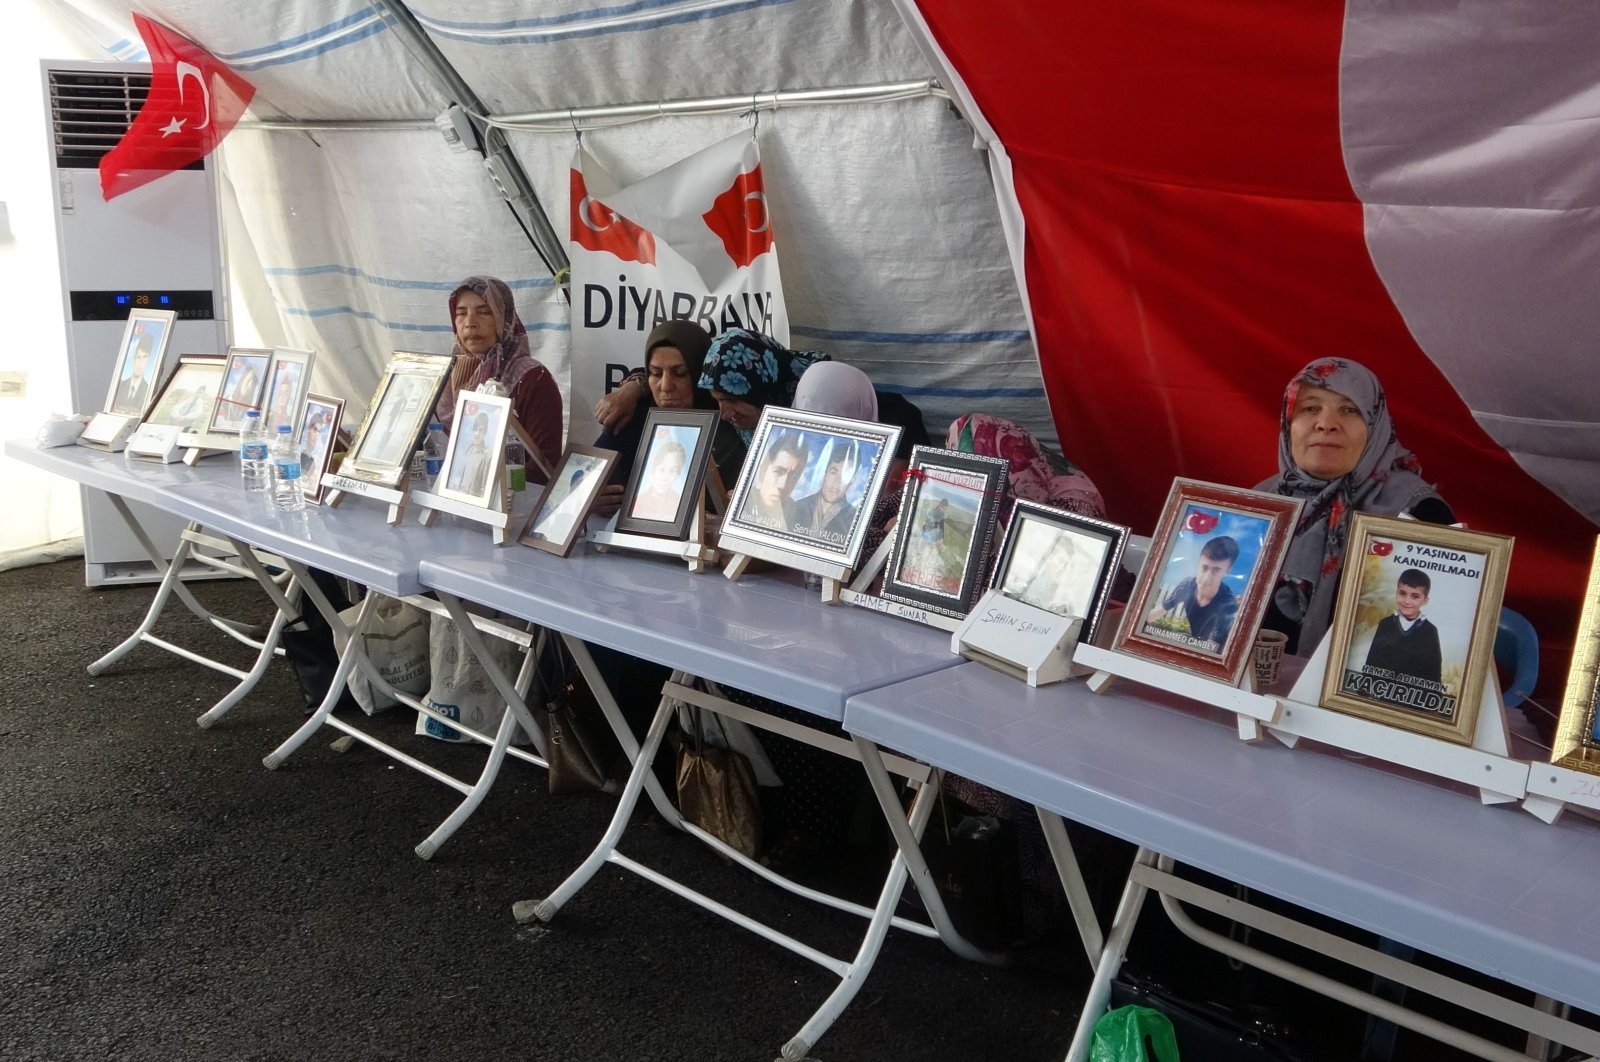 Families protest the abduction of their relatives by the PKK terrorist group, Diyarbakır, southeastern Turkey, June 2, 2022. (IHA Photo)